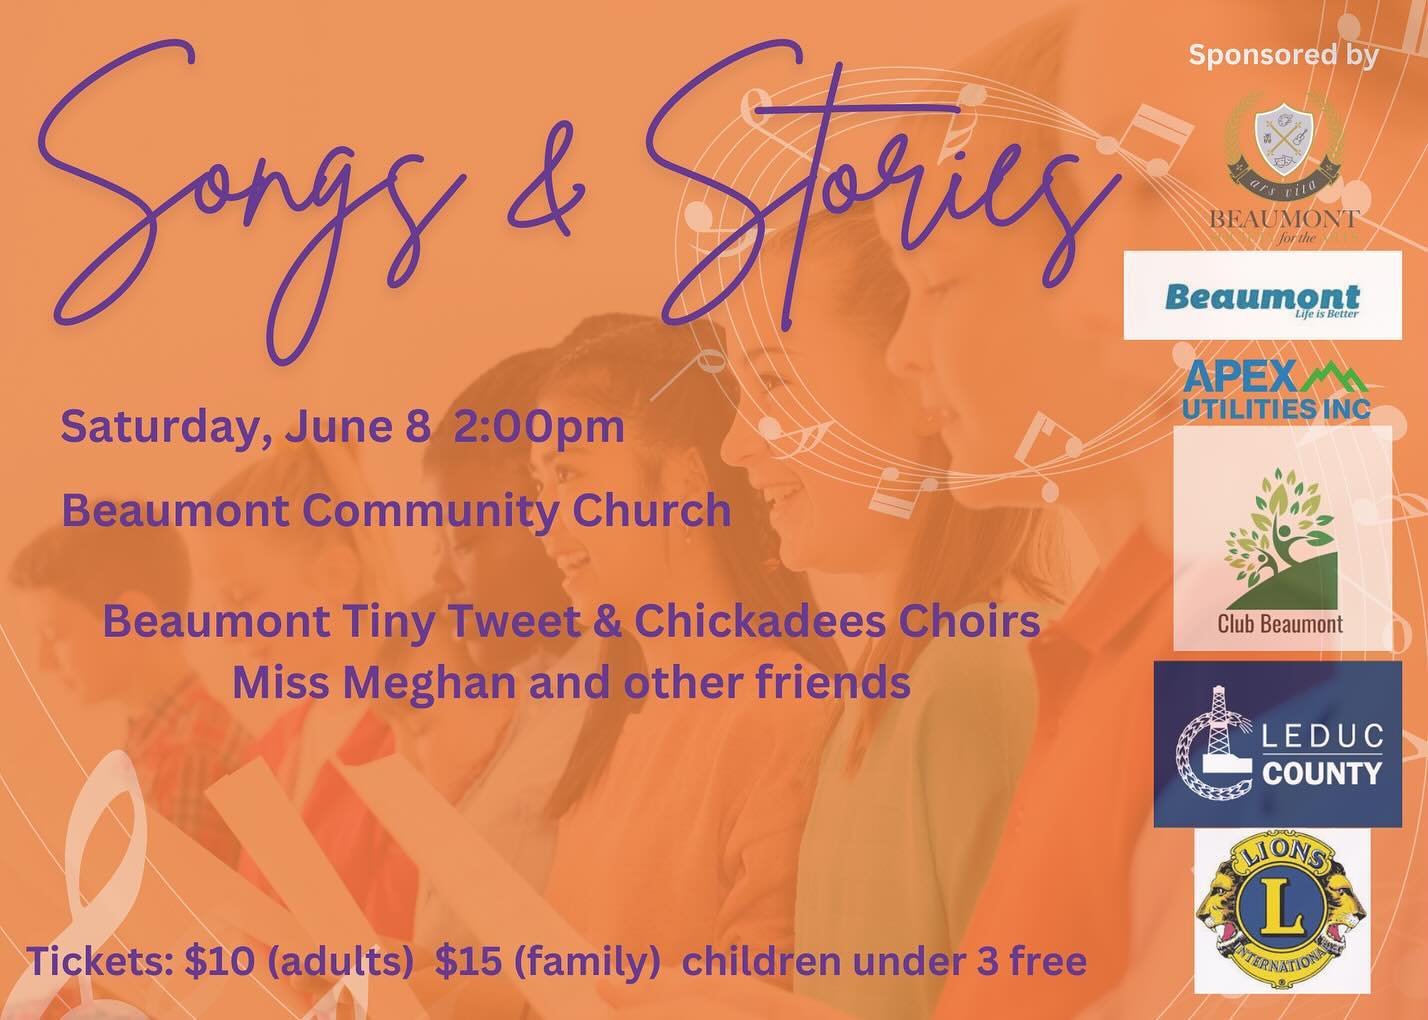 Our children&rsquo;s concert on June 8 will be a delightful mixture of songs, silliness, stories, and so much fun for the whole family!

Tickets available at www.beaumontsongbirdschoirs.com